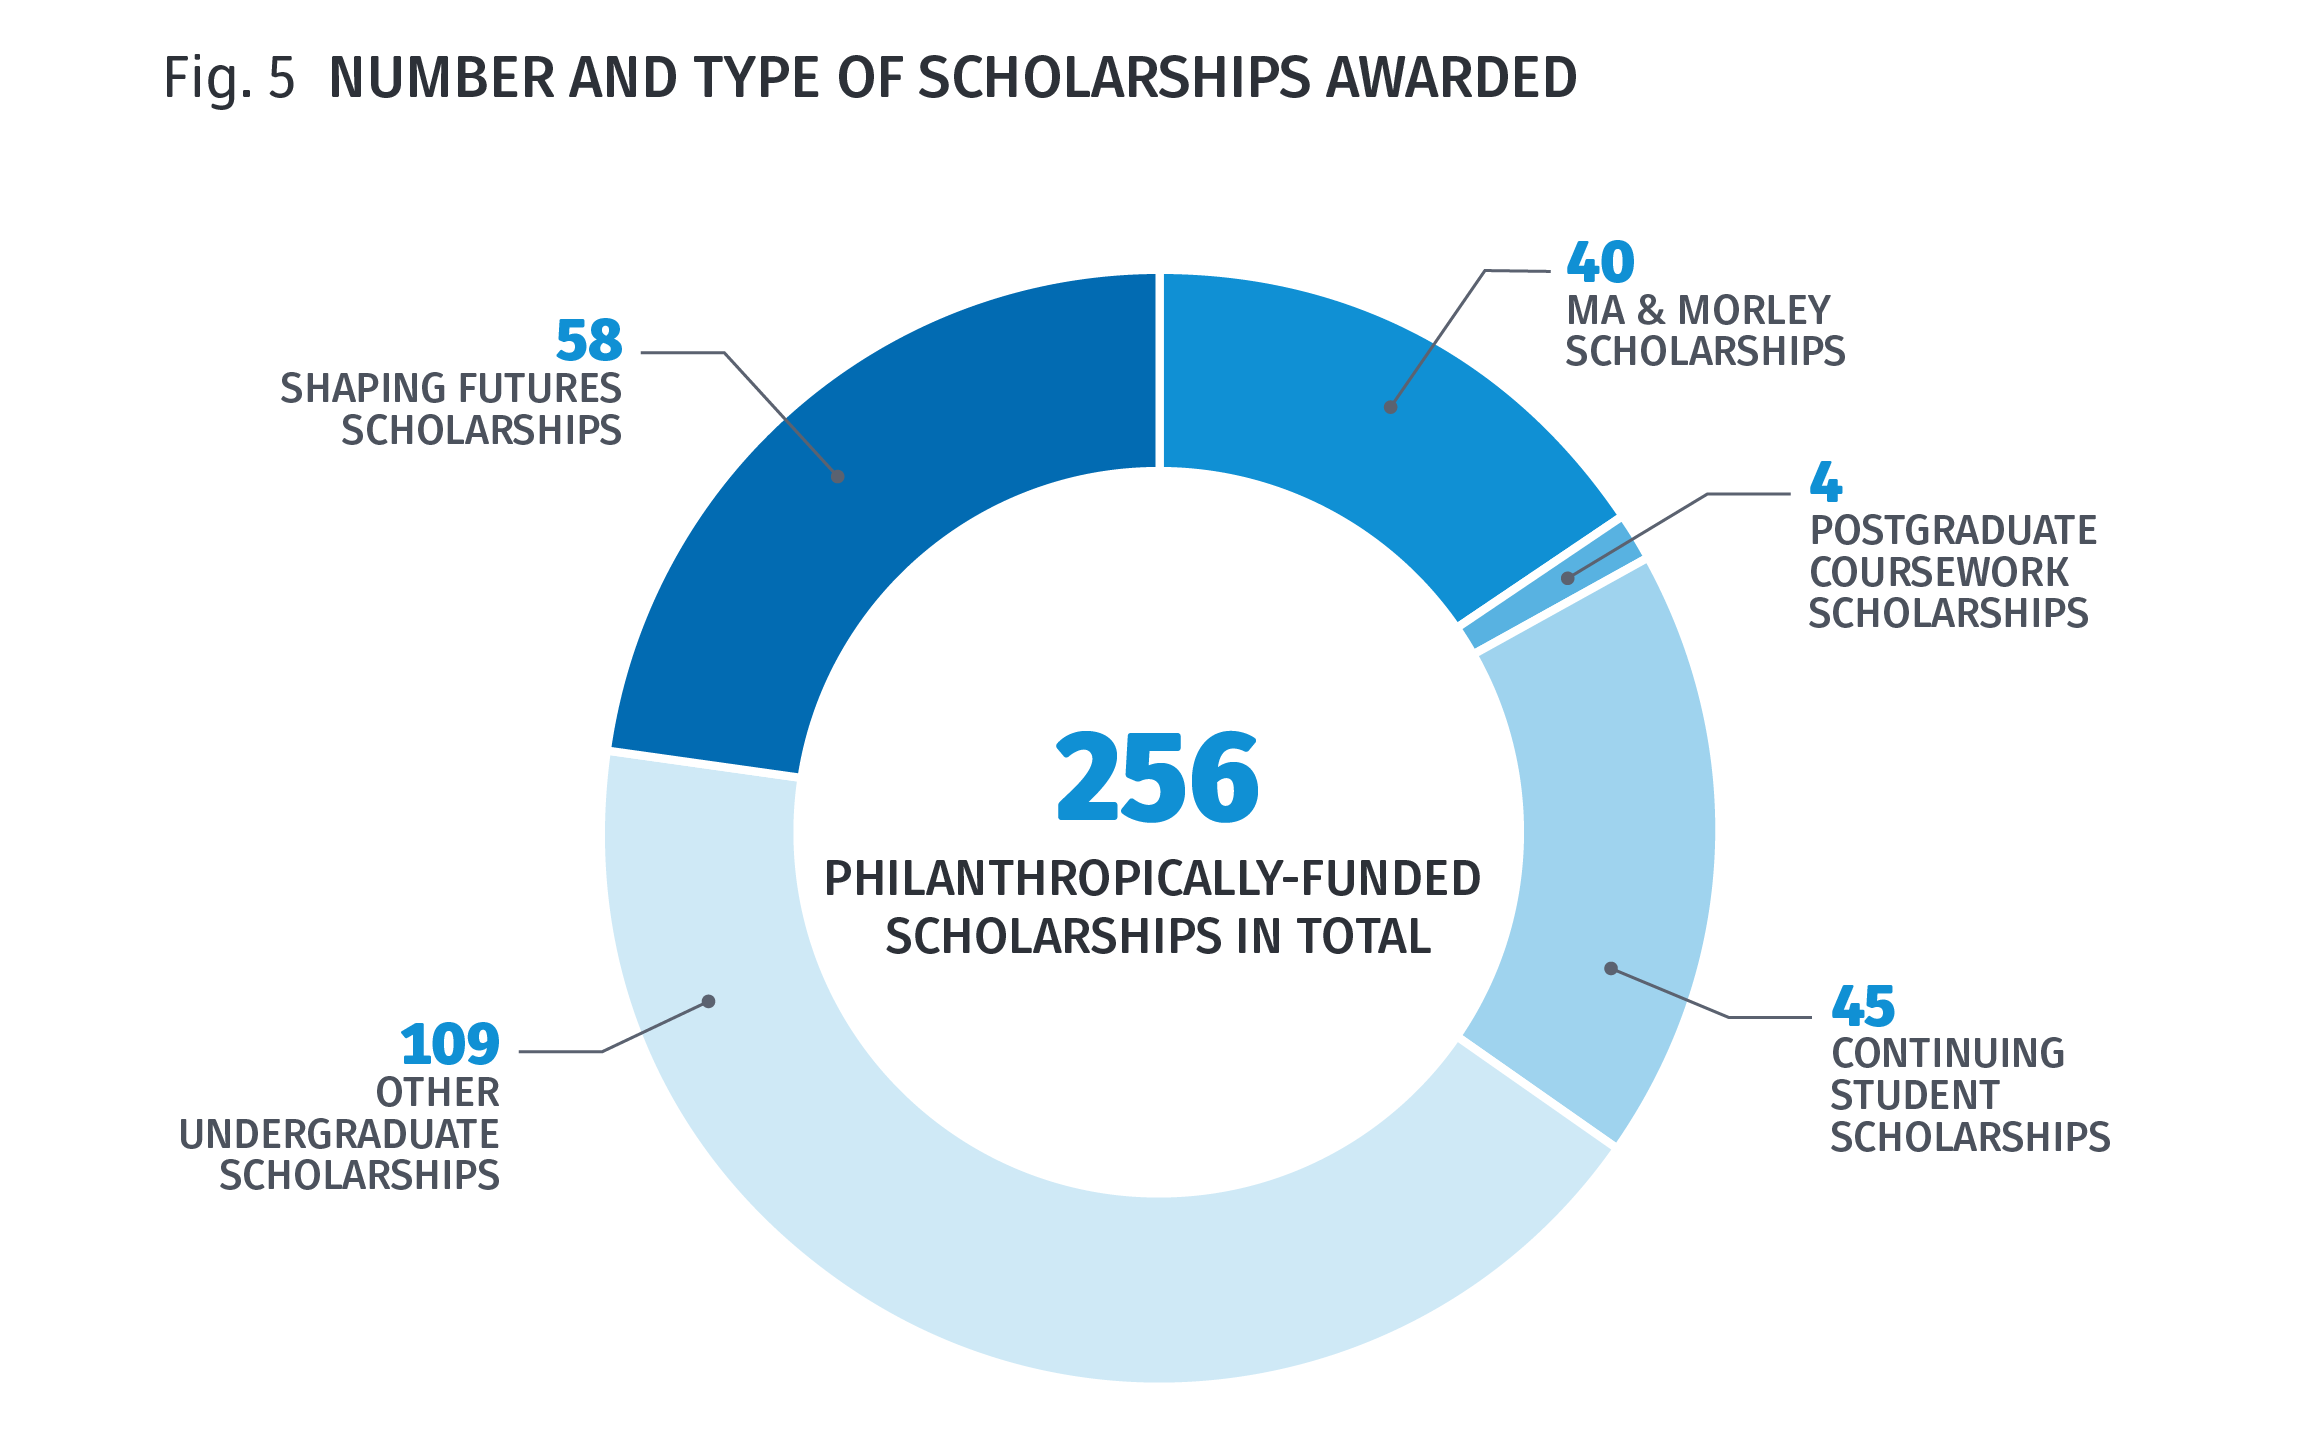 Number and type of scholarships awarded chart